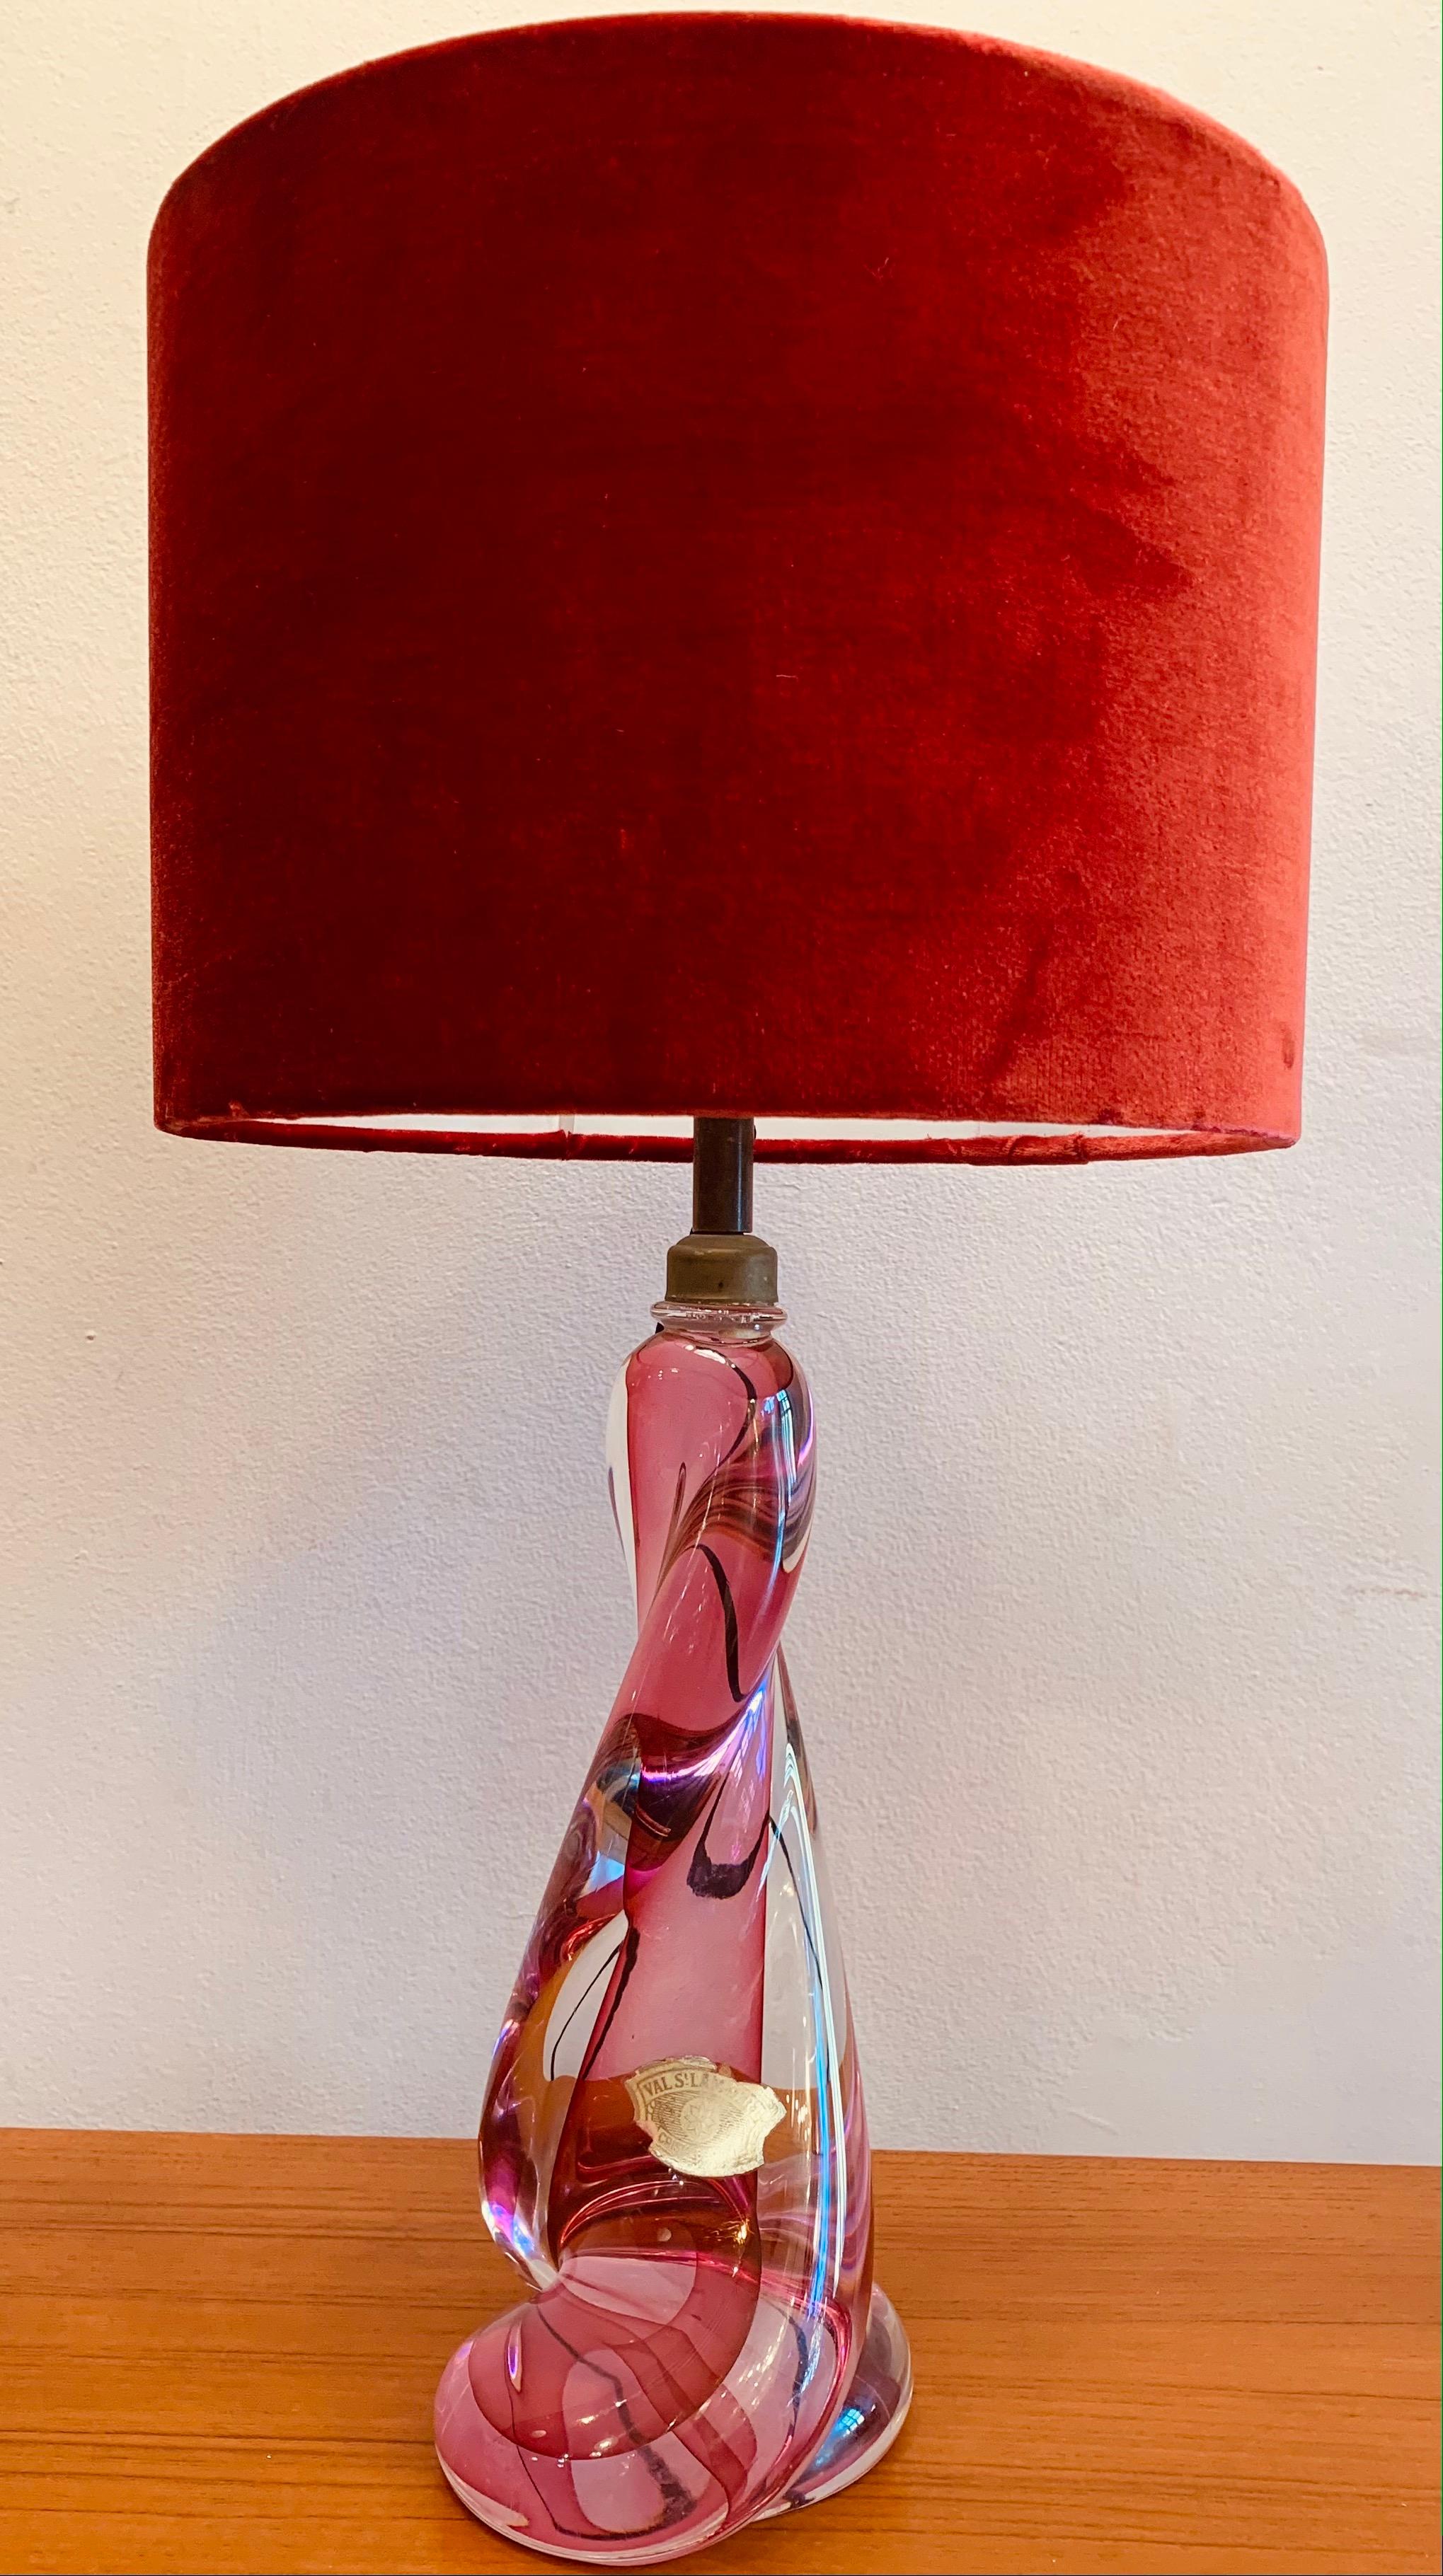 1950s Val St Lambert, pink and clear glass, twisted crystal lamp base with a vintage brass light fitting. Handblown in heavy lead crystal glass in Belgium. The brand new deep pink velvet shade is included. Part of the original foil Val St Lambert is